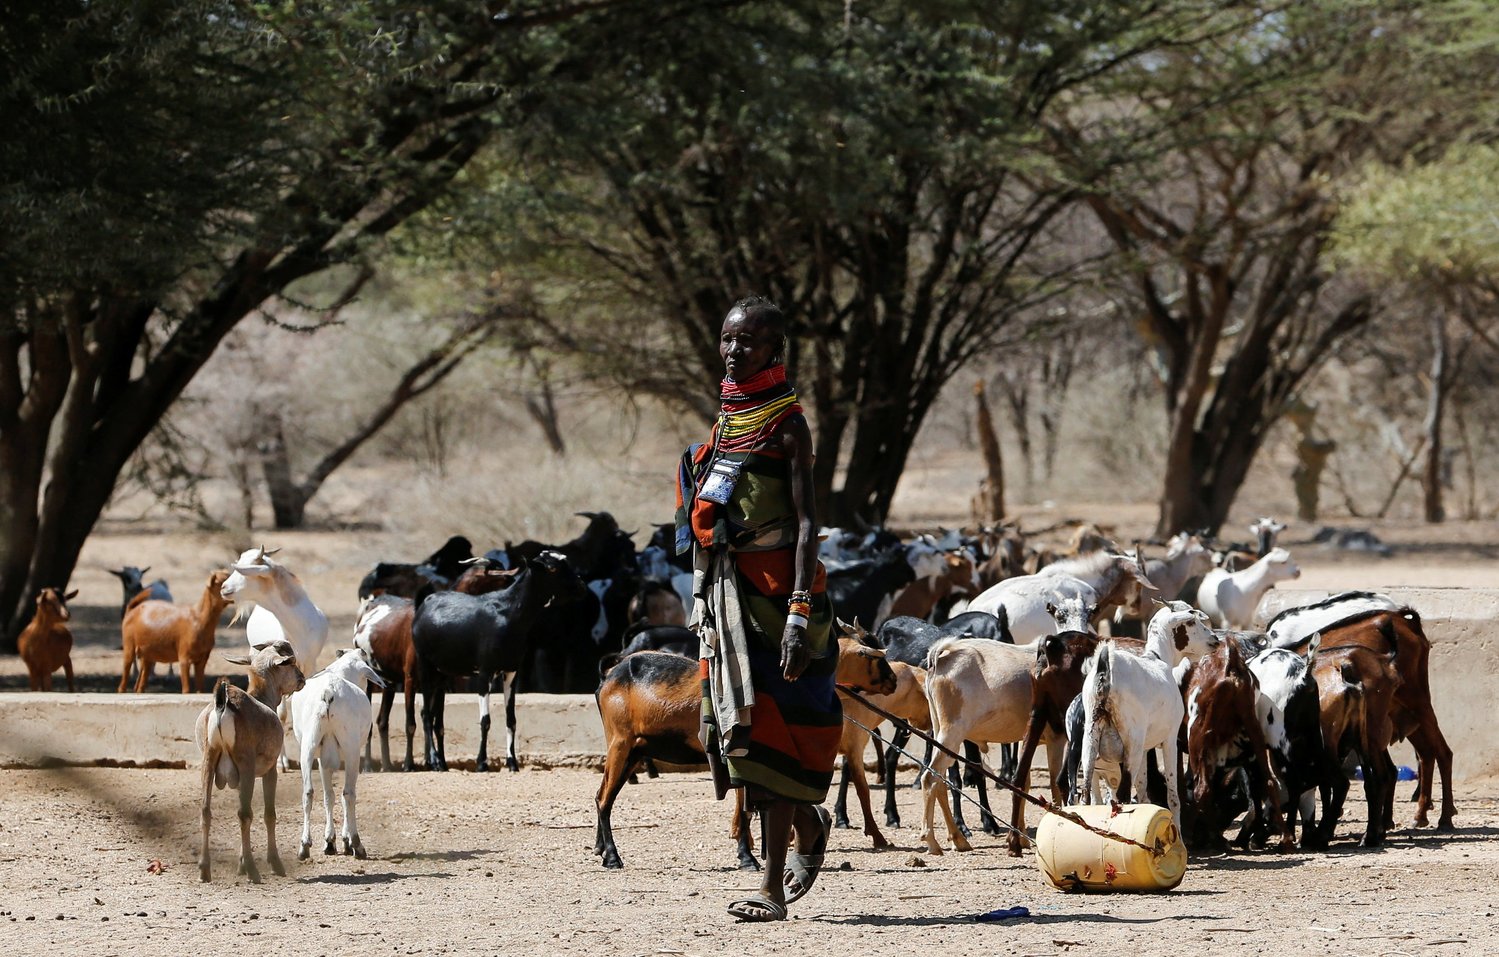 A woman from the Turkana pastoralist community affected by the worsening drought due to failed rain seasons pulls a jerrycan of water past goats at Sopel village in Turkana, Kenya Sept. 27.